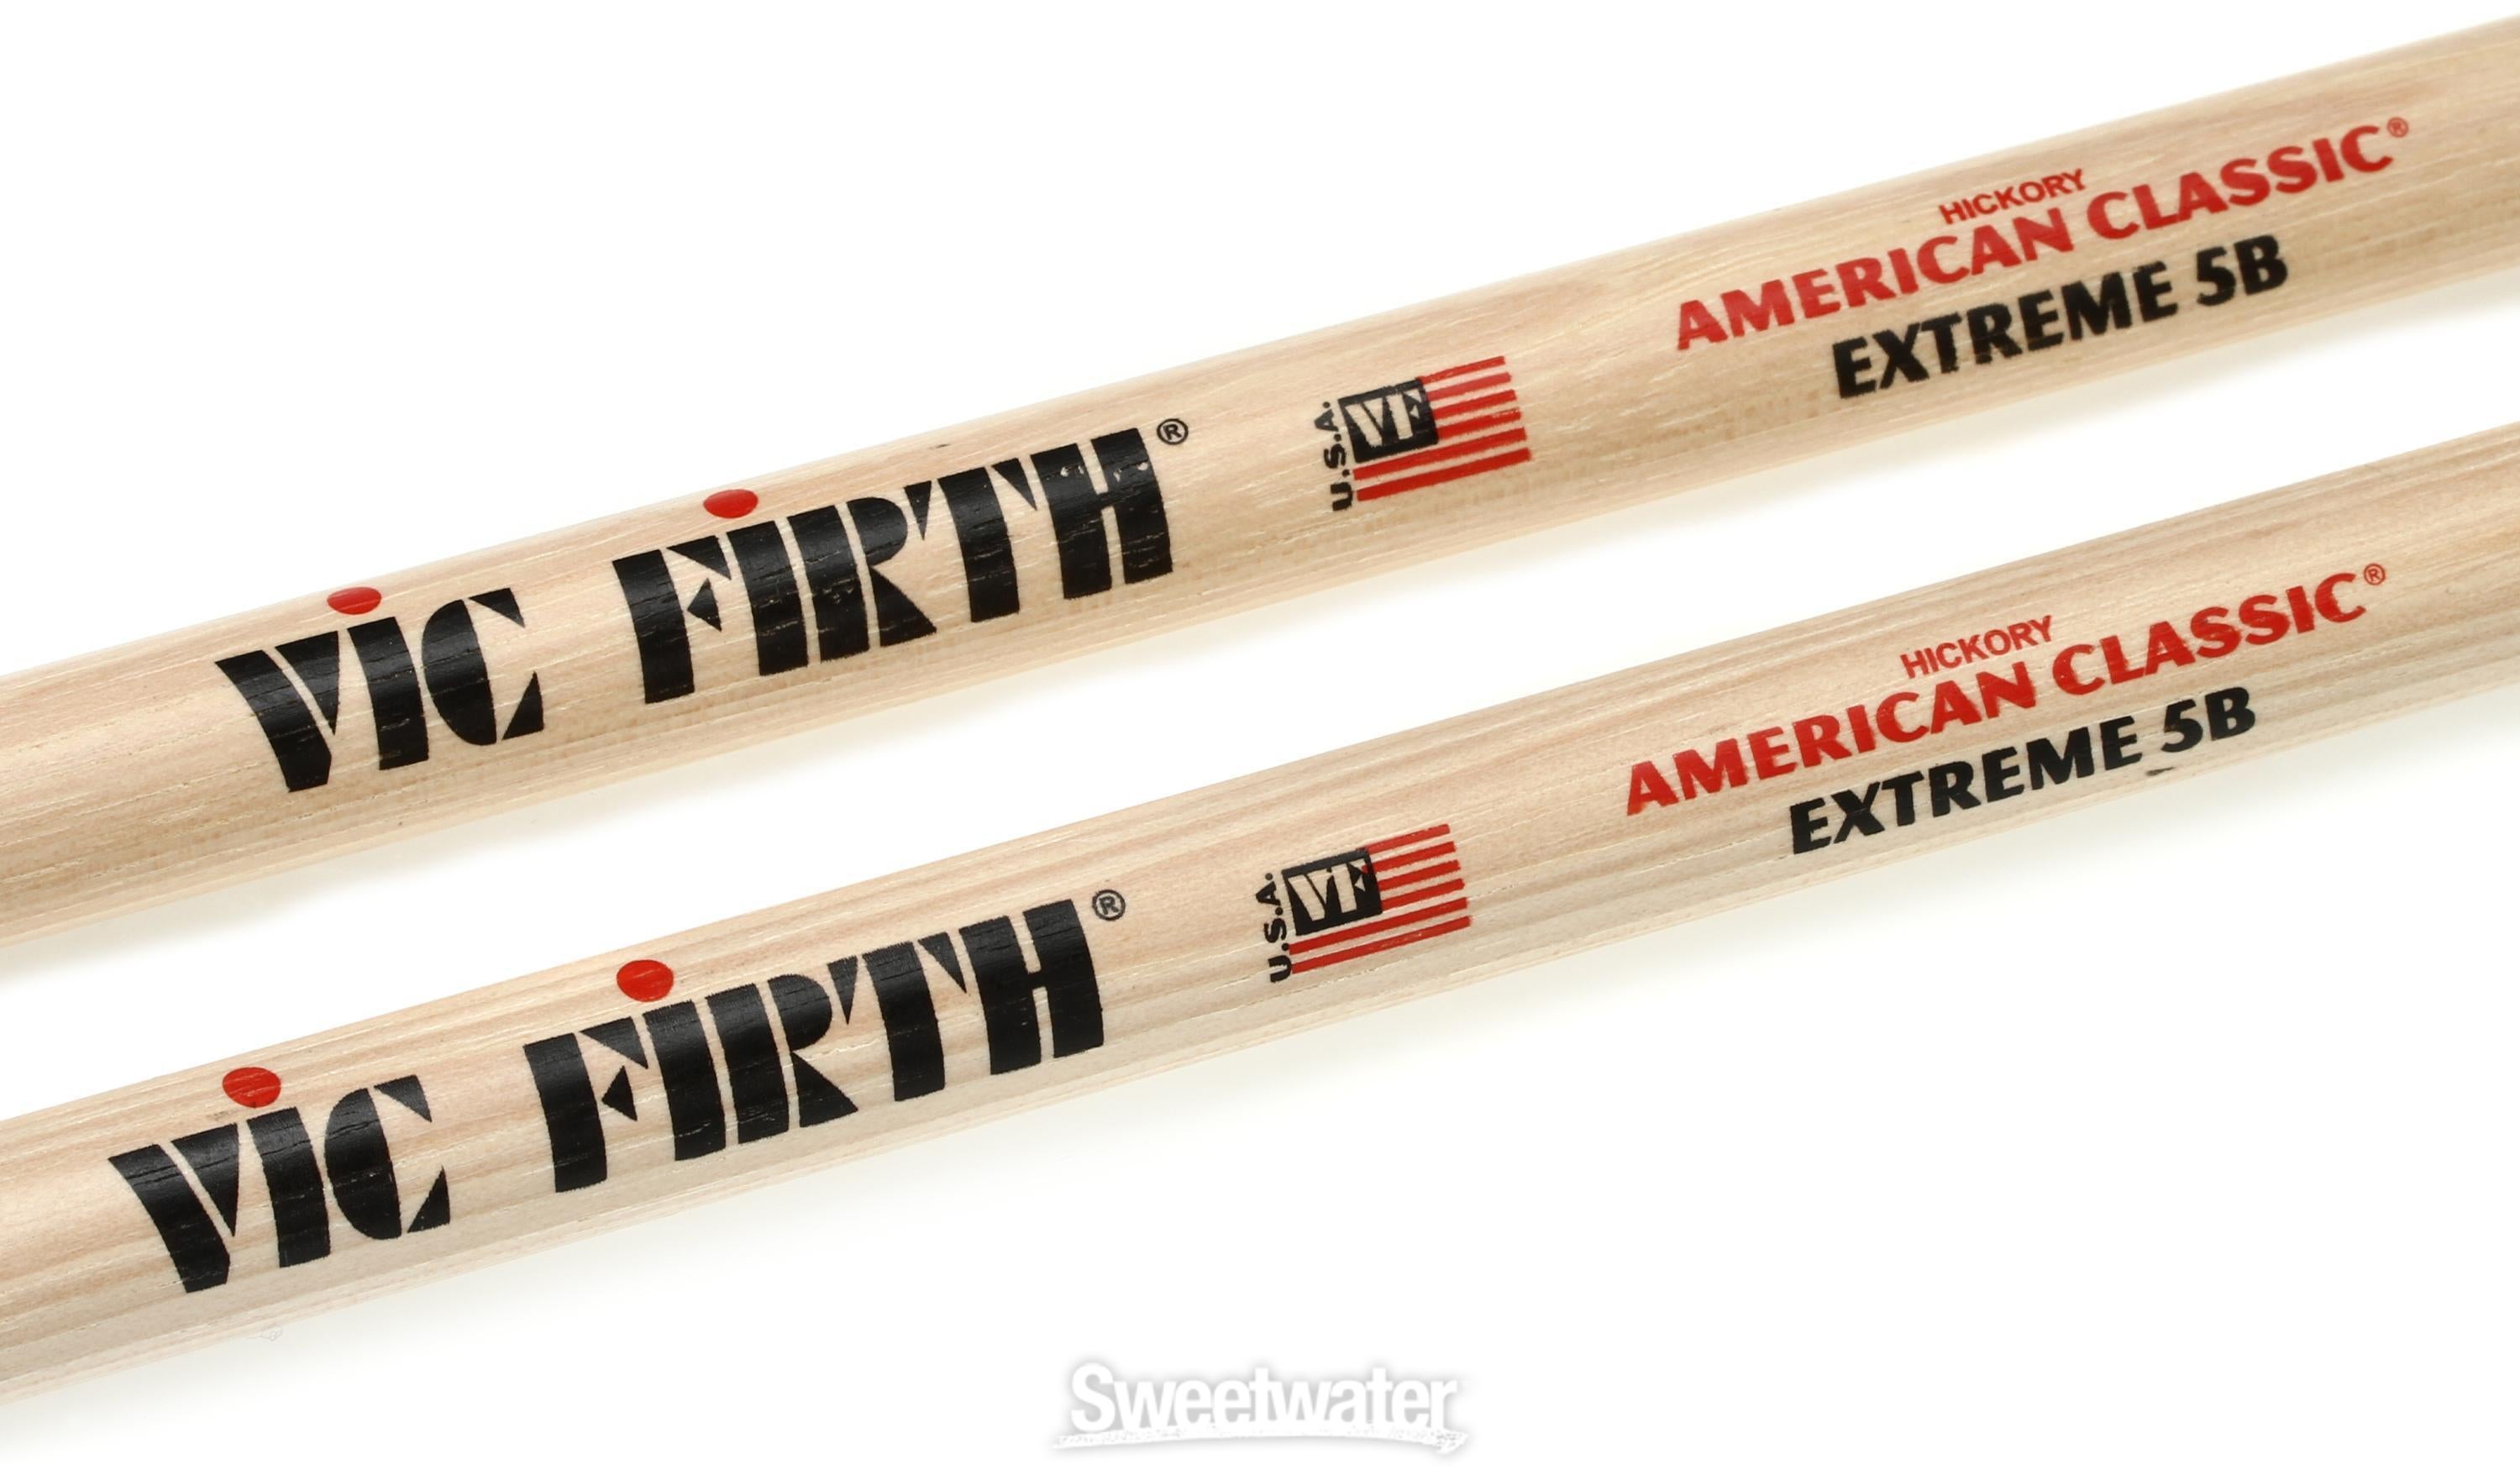 Vic Firth American Classic Drumsticks - Extreme 5B - Wood Tip